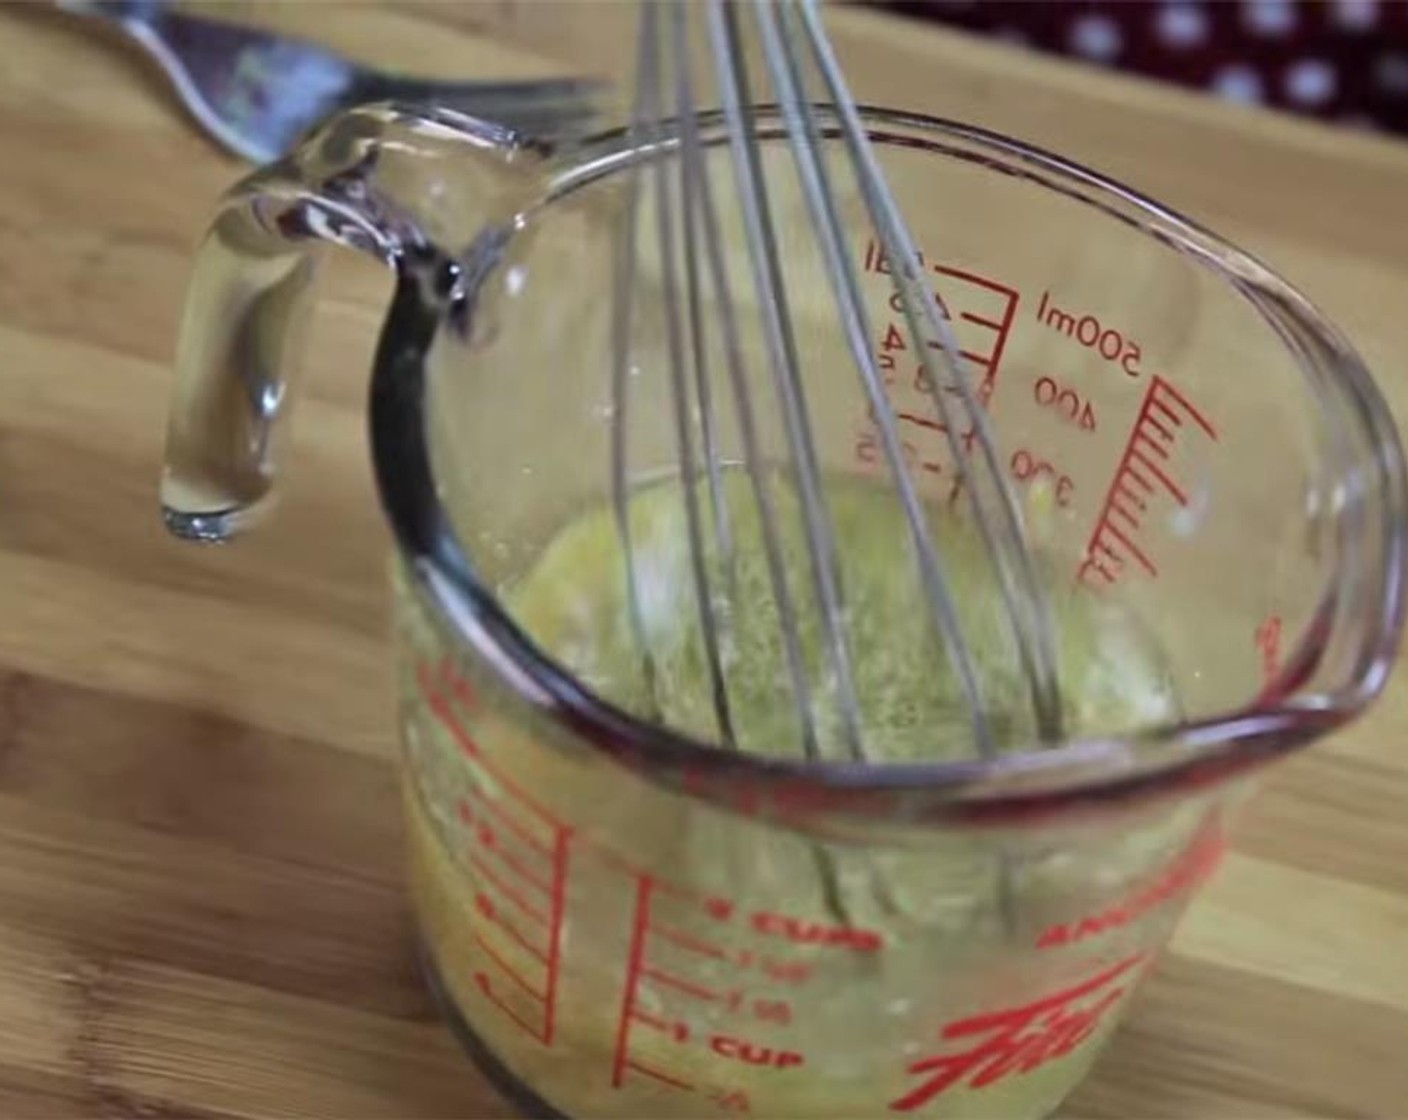 step 2 In a measuring cup, combine Vegetable Broth (3/4 cup) and Tahini (1/4 cup) and whisk until smooth.